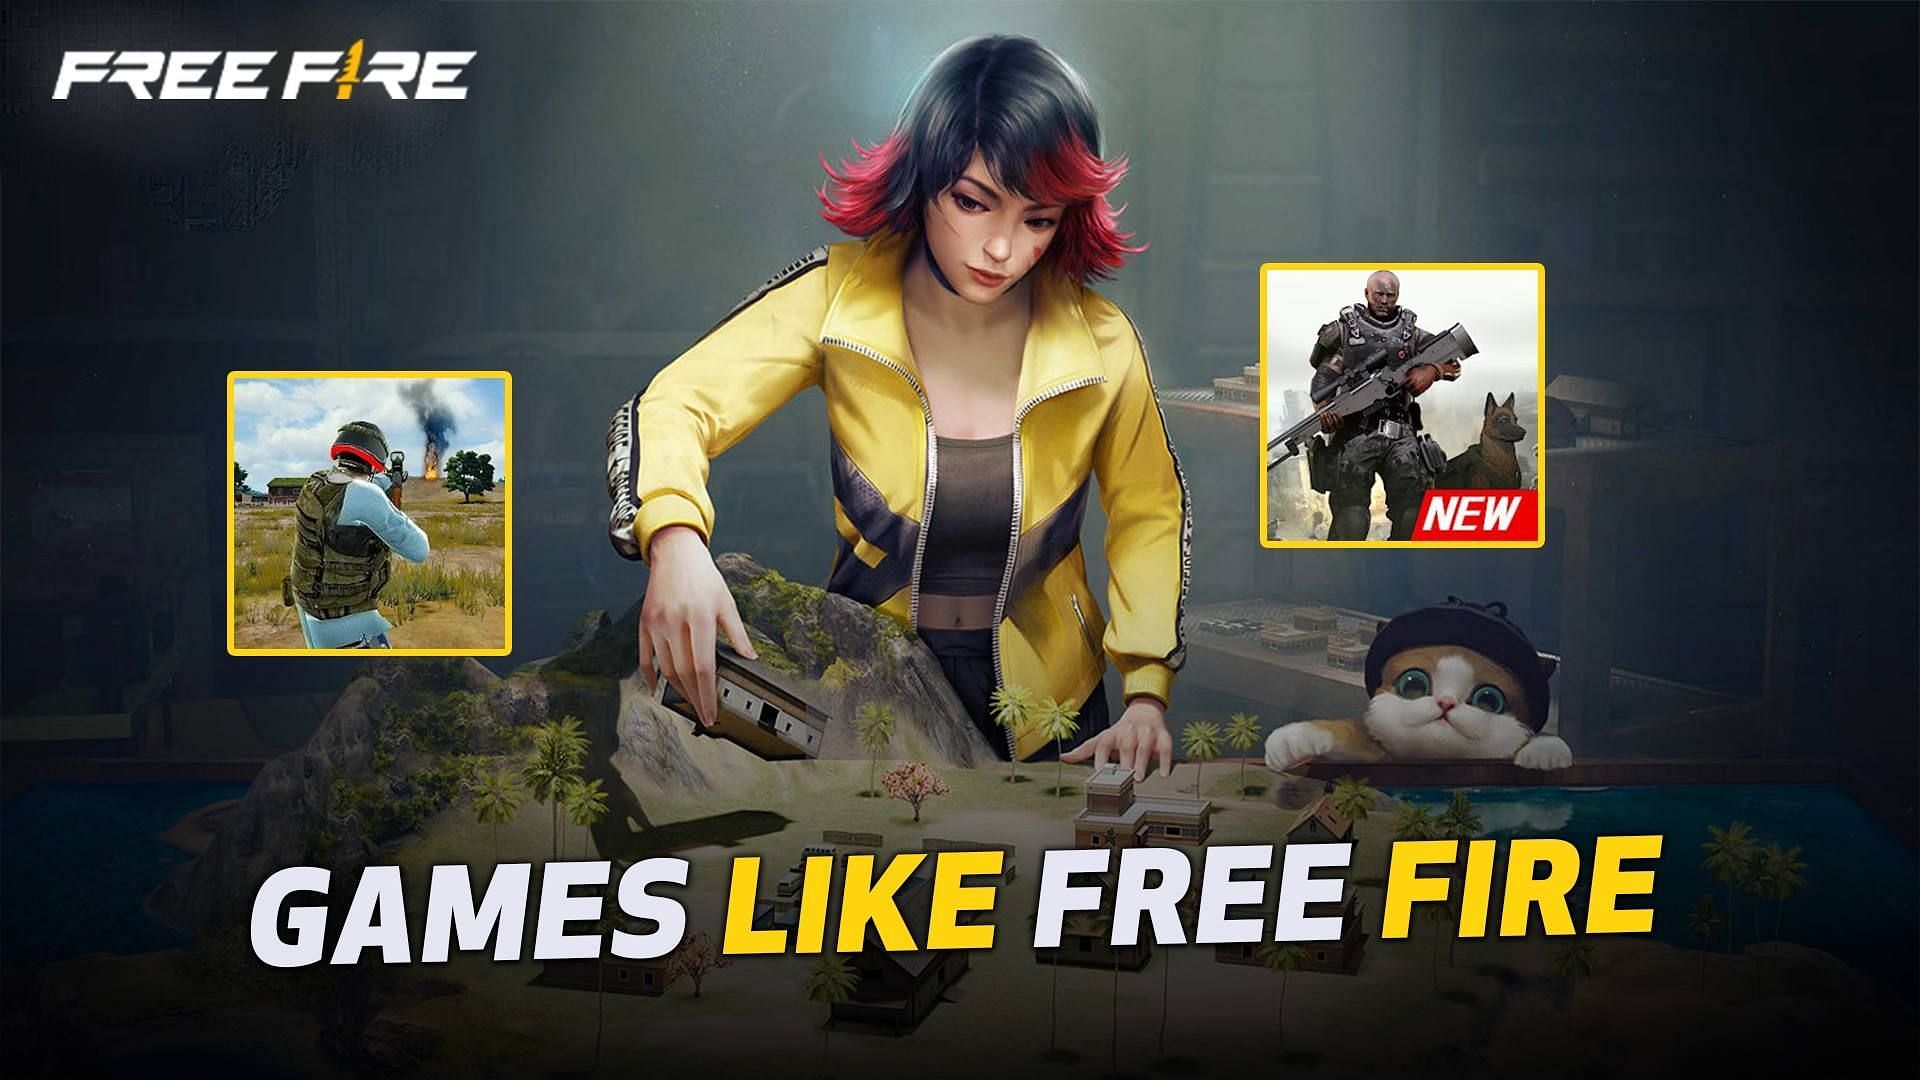 Top 5 Games Like Free Fire👿 Under 100MB🤑 